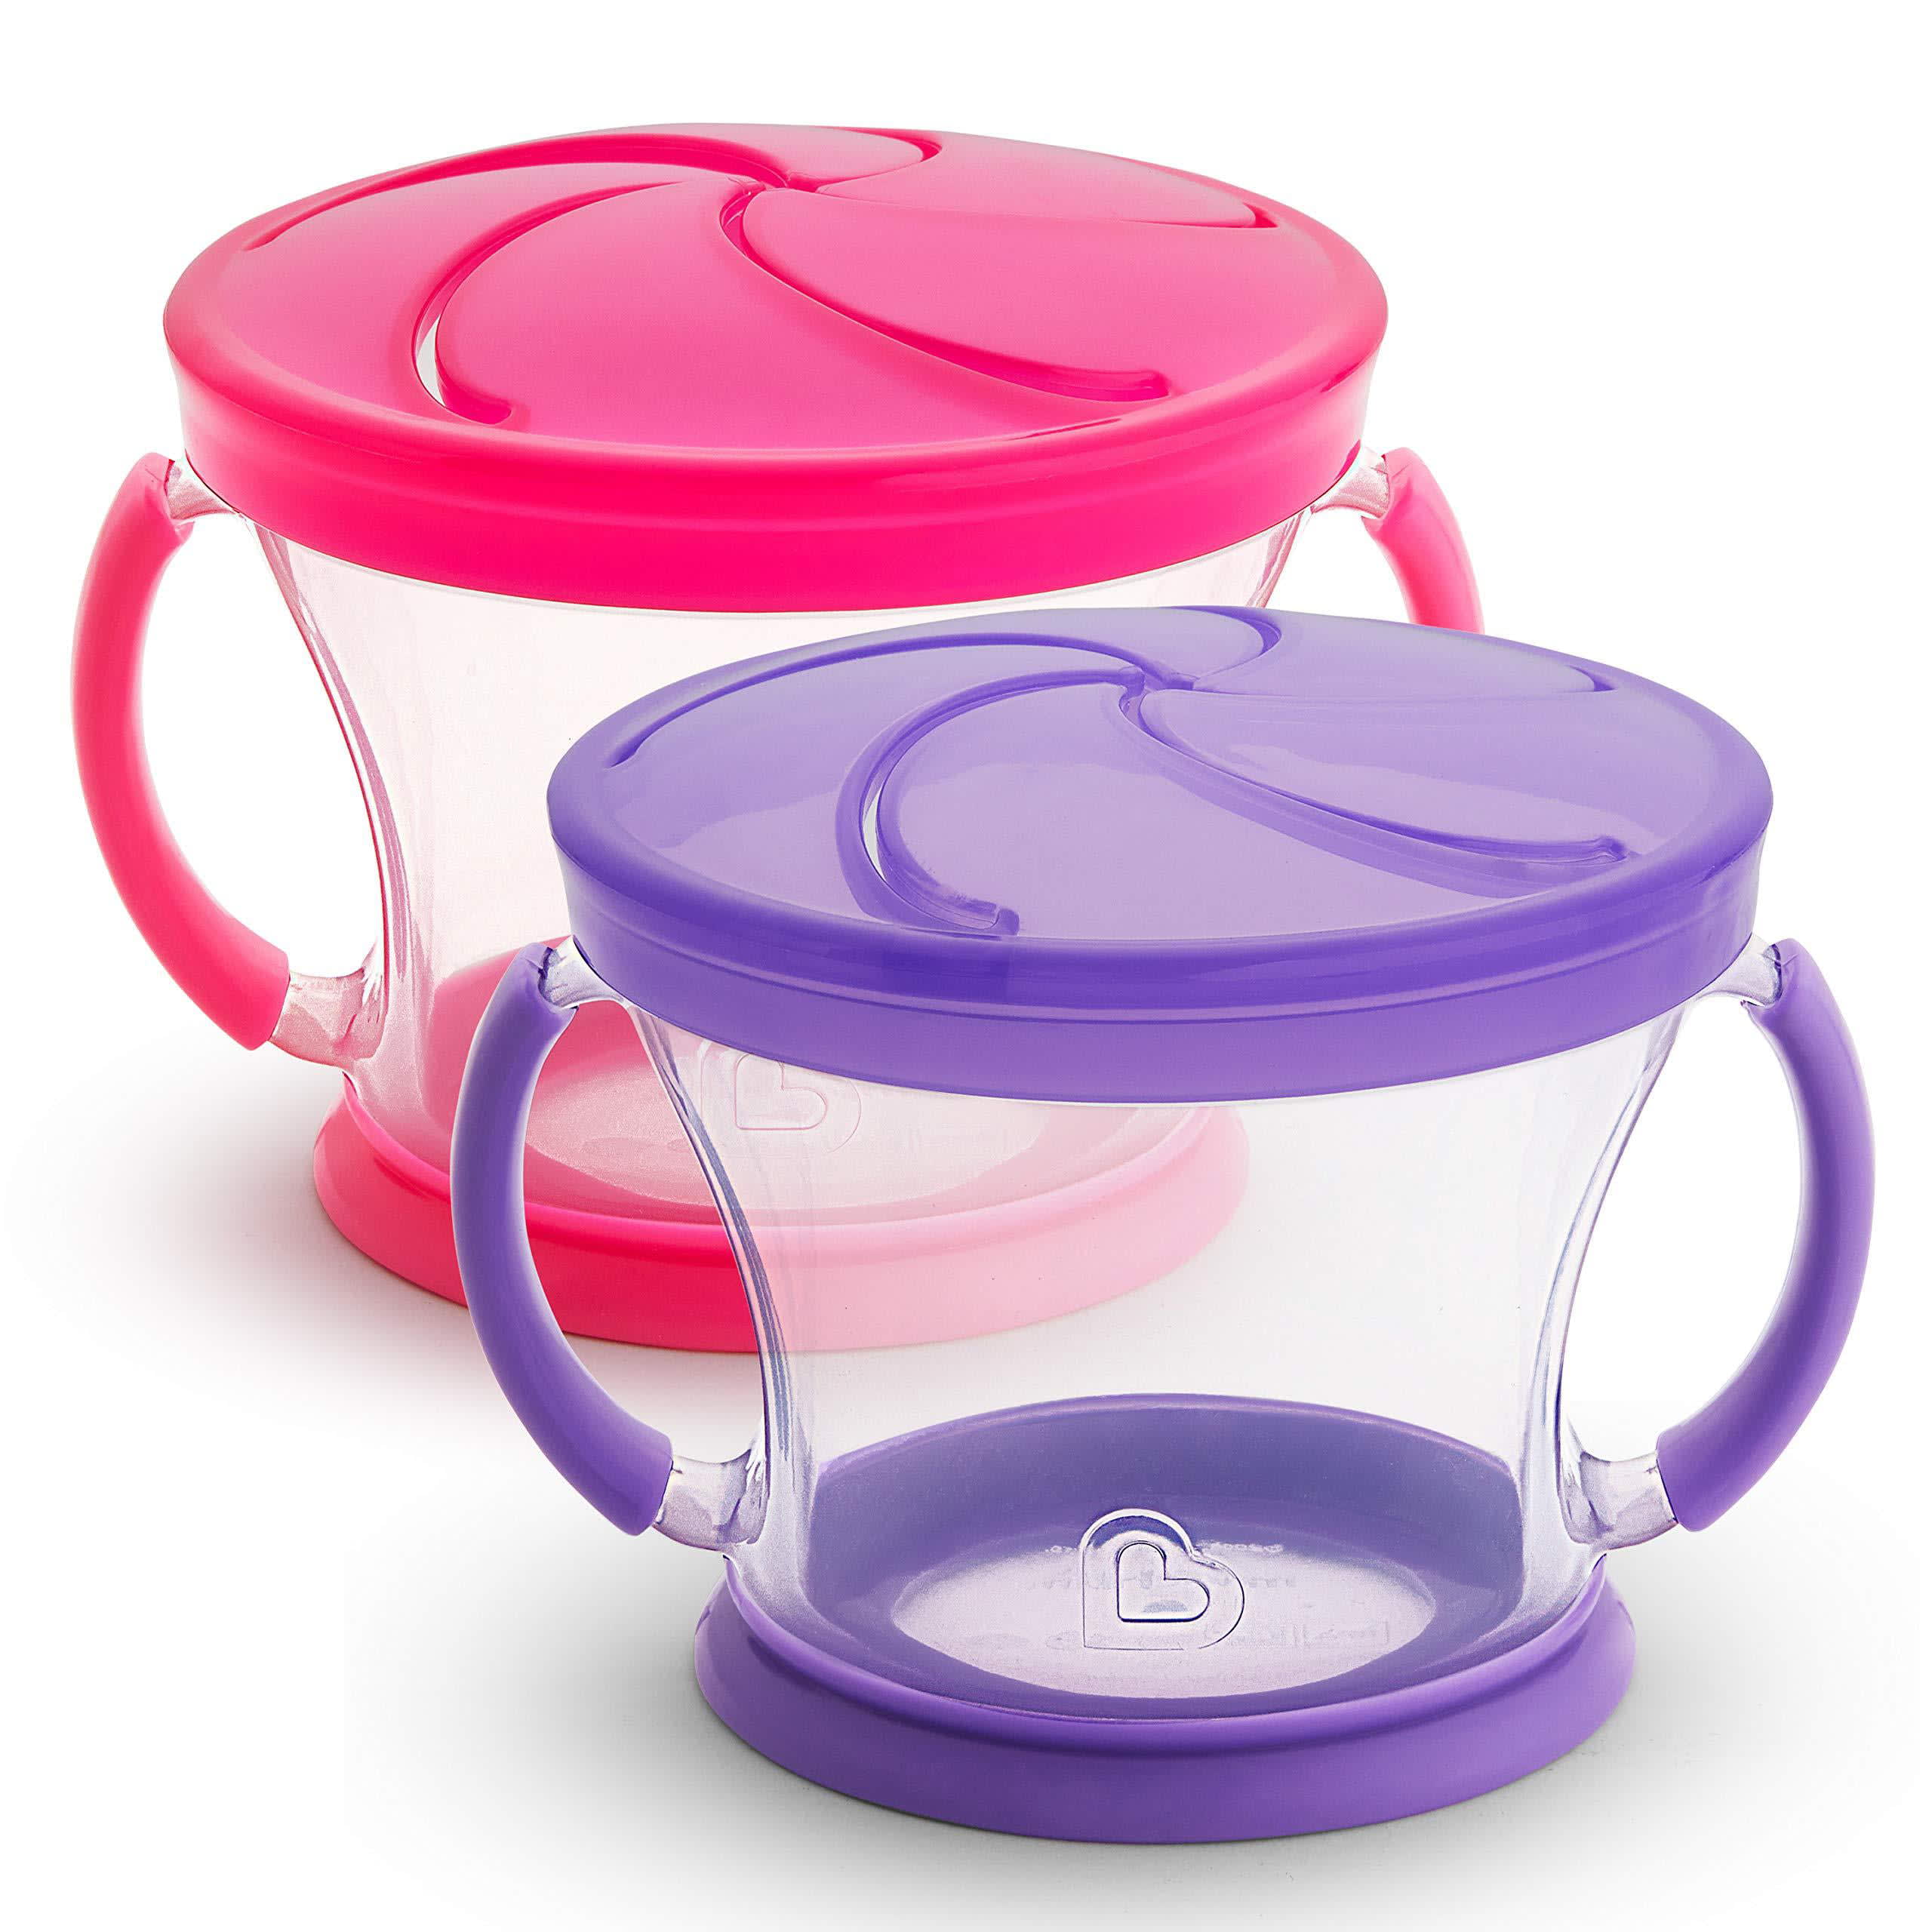 Munchkin Snack Catcher Snack Container Cup, Pink/Purple, 2 Pack